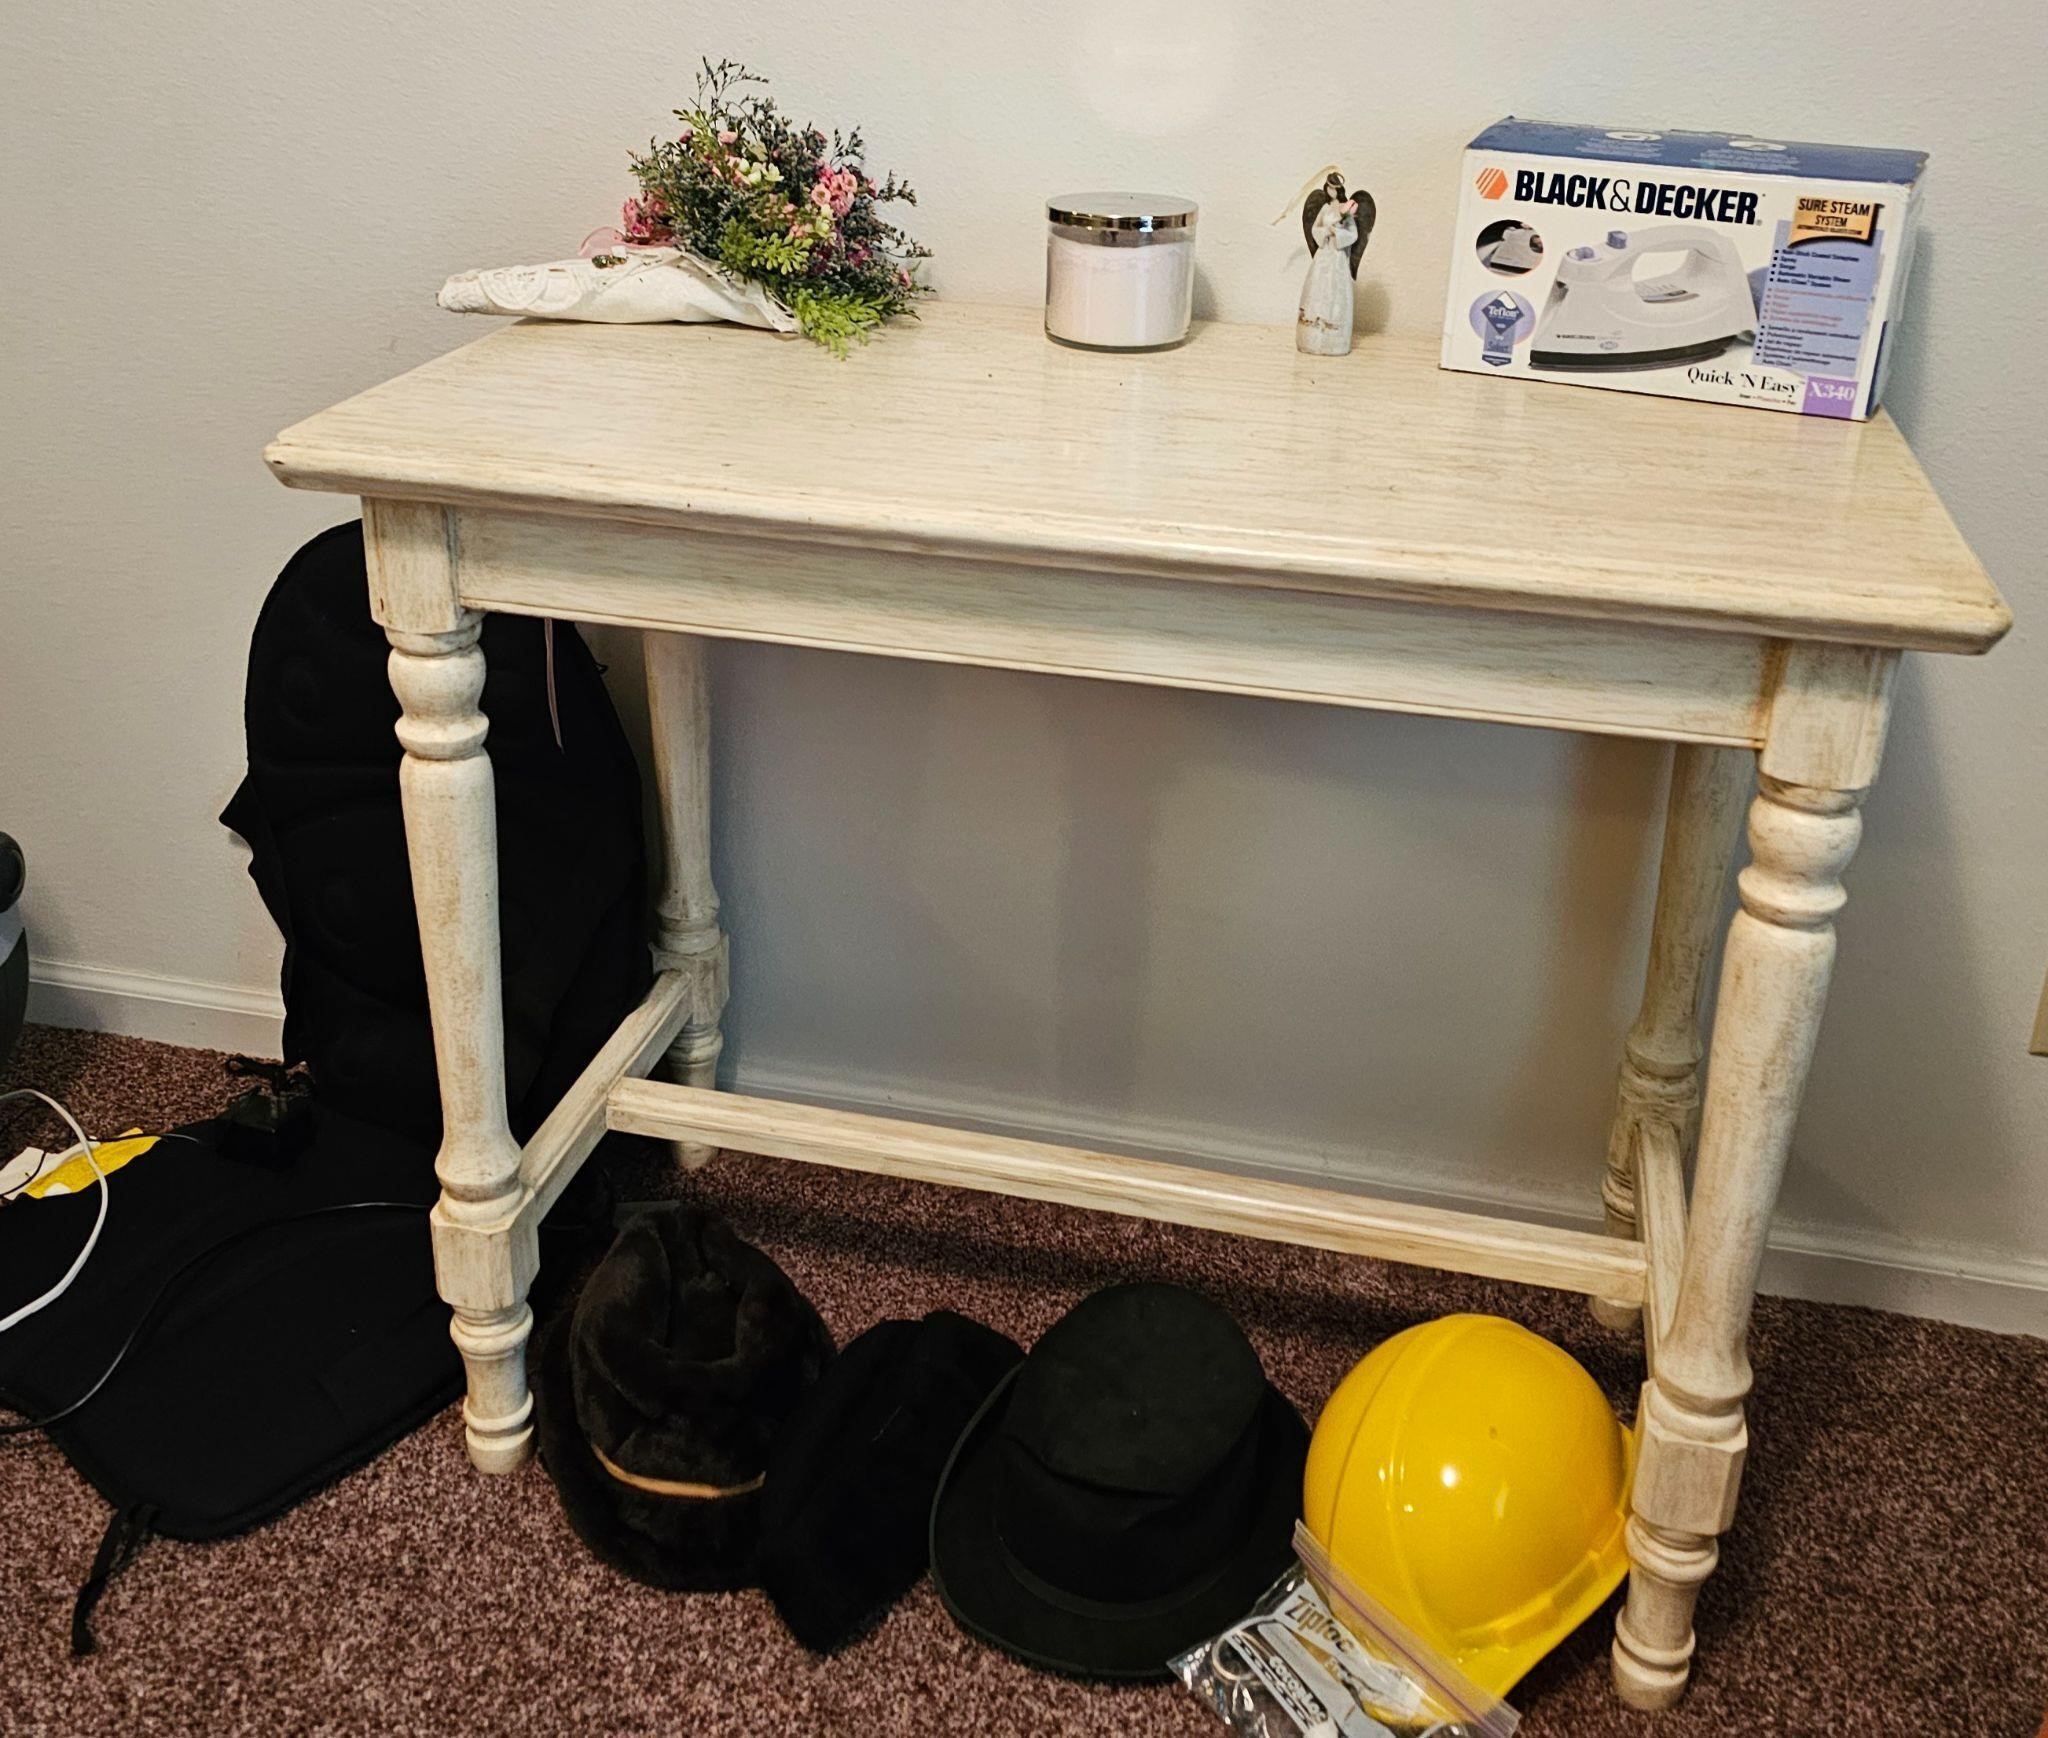 Table w/accessories